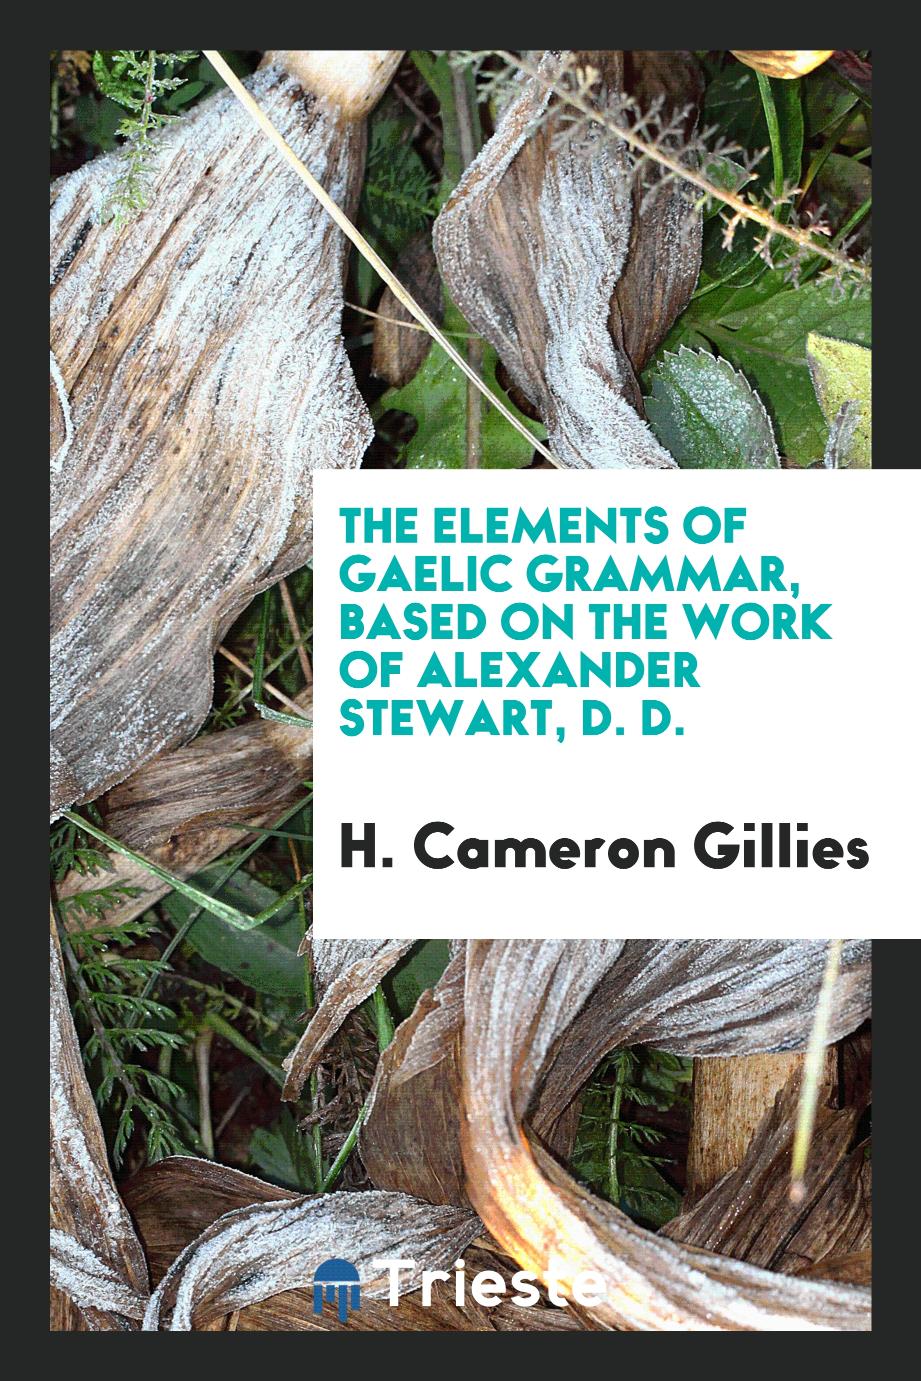 H. Cameron Gillies - The Elements of Gaelic Grammar, Based on the Work of Alexander Stewart, D. D.